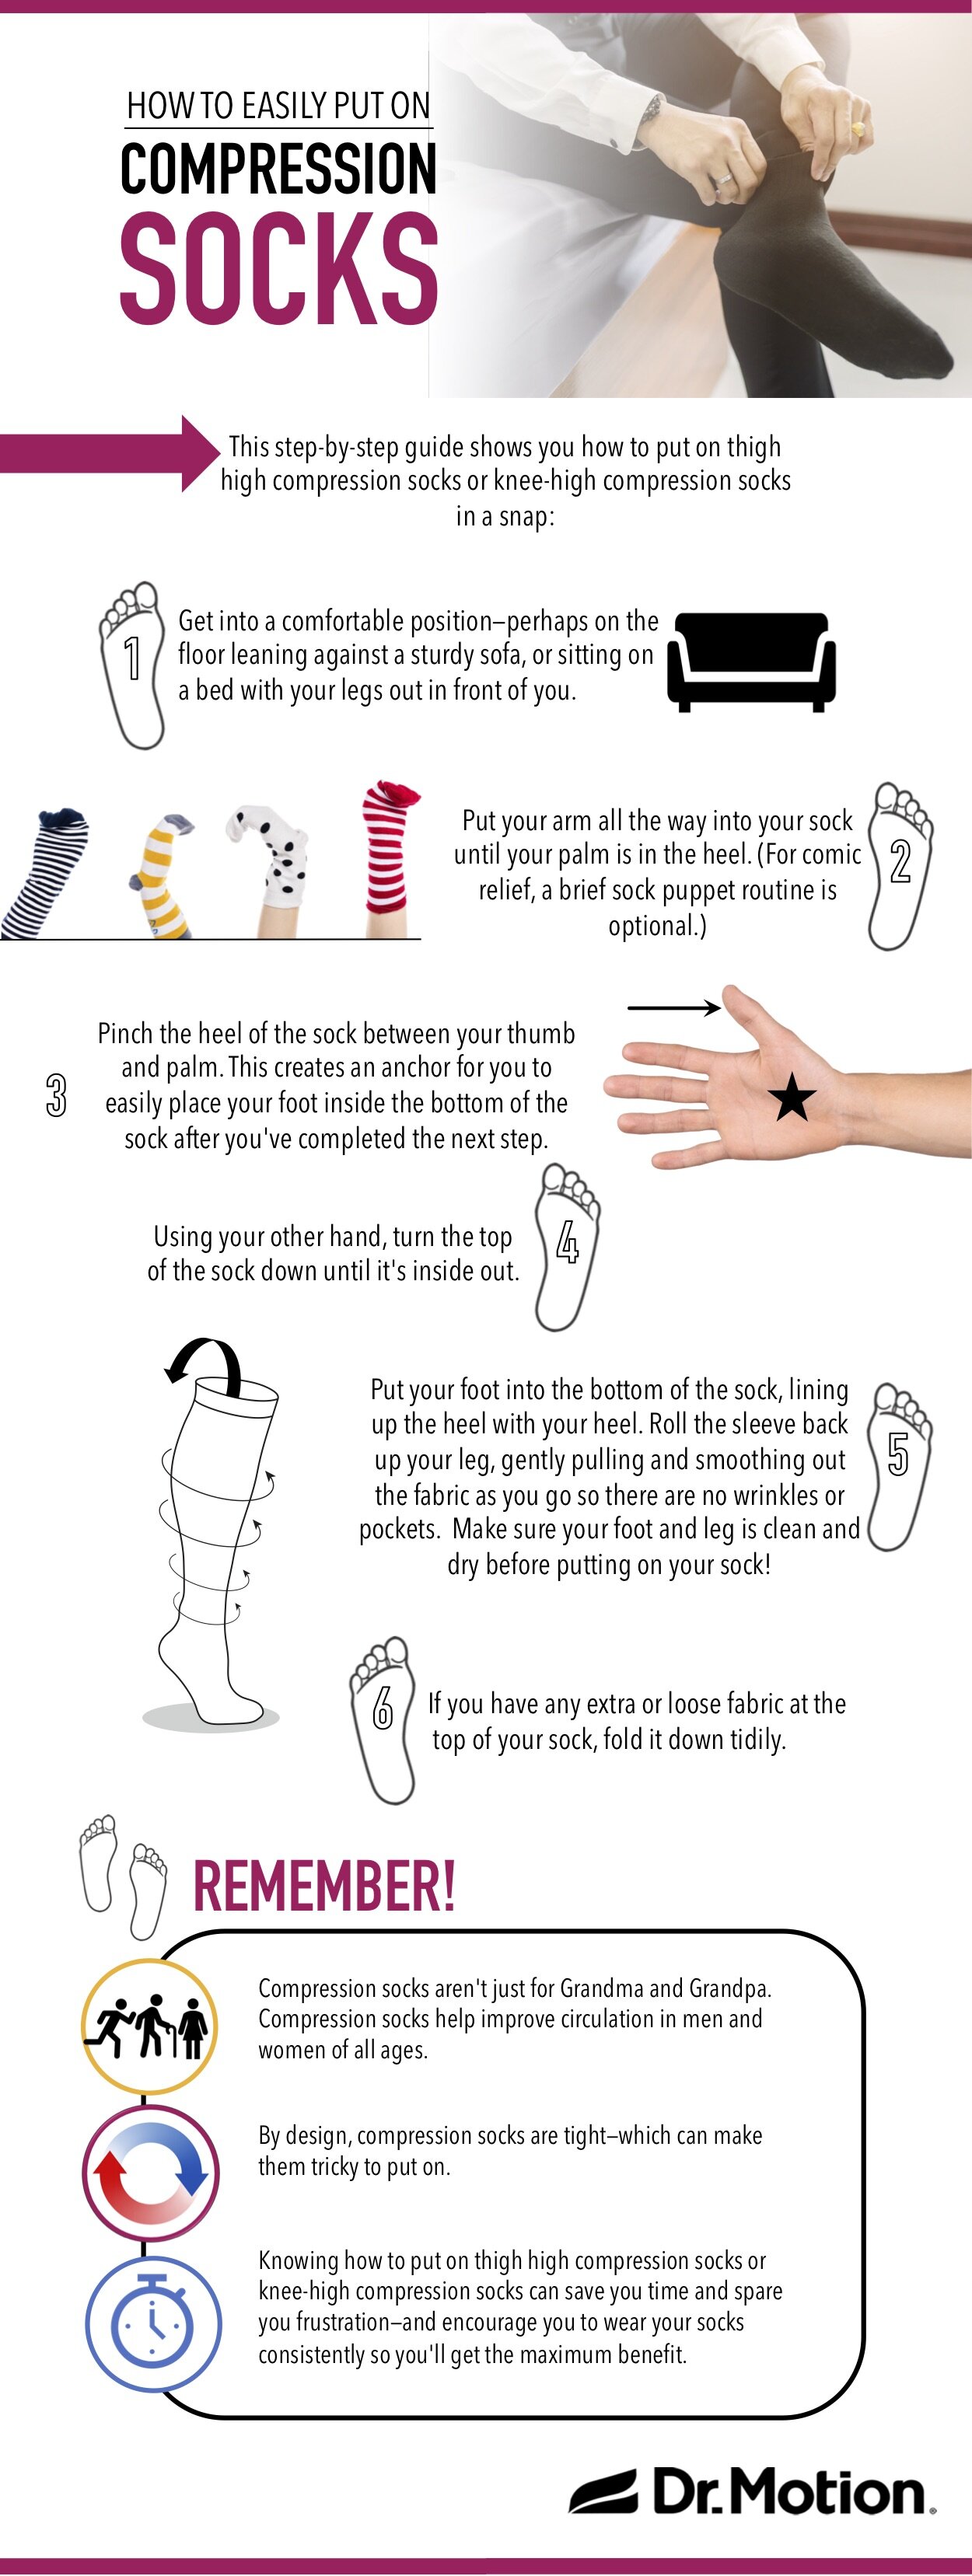 How to Put Compression Stockings on Easily